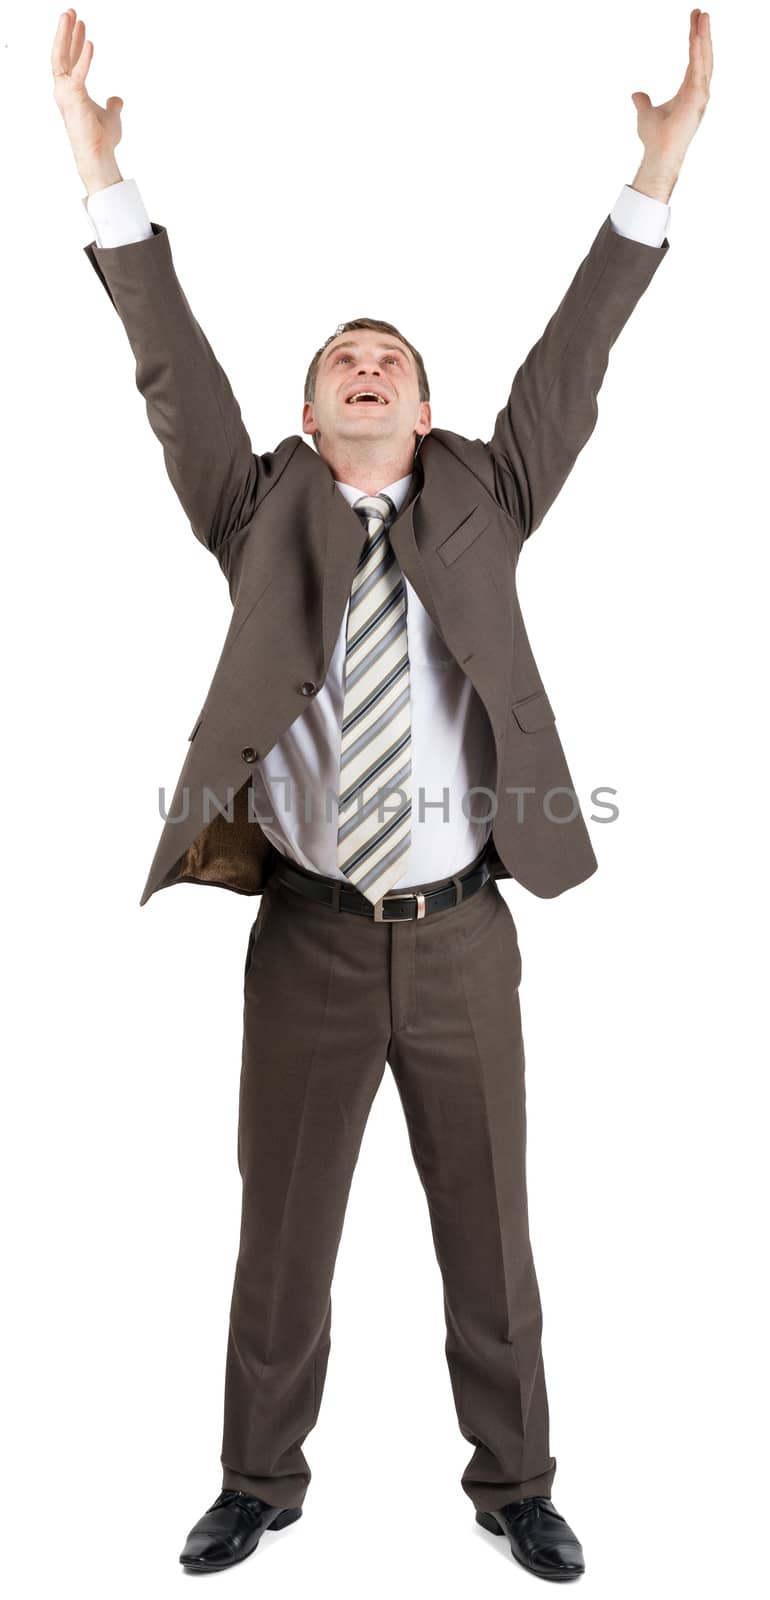 Businessman running up isolated on white background, front view